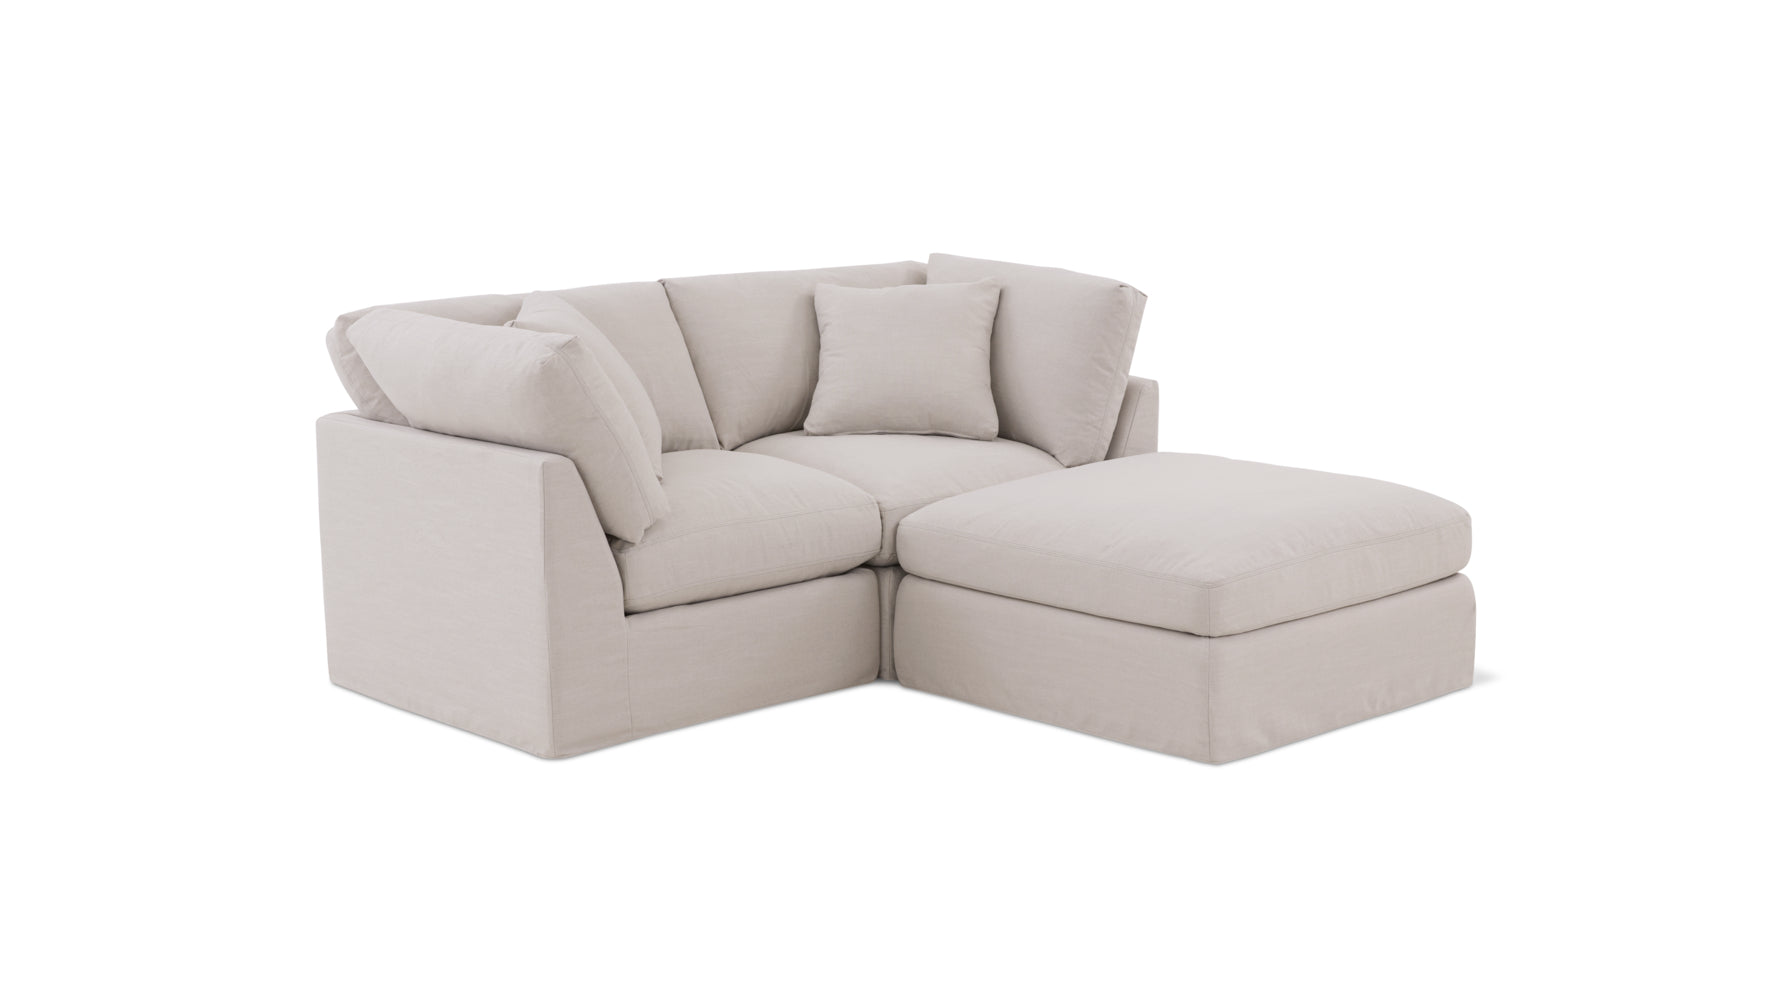 Get Together™ 3-Piece Modular Sectional, Standard, Clay - Image 2